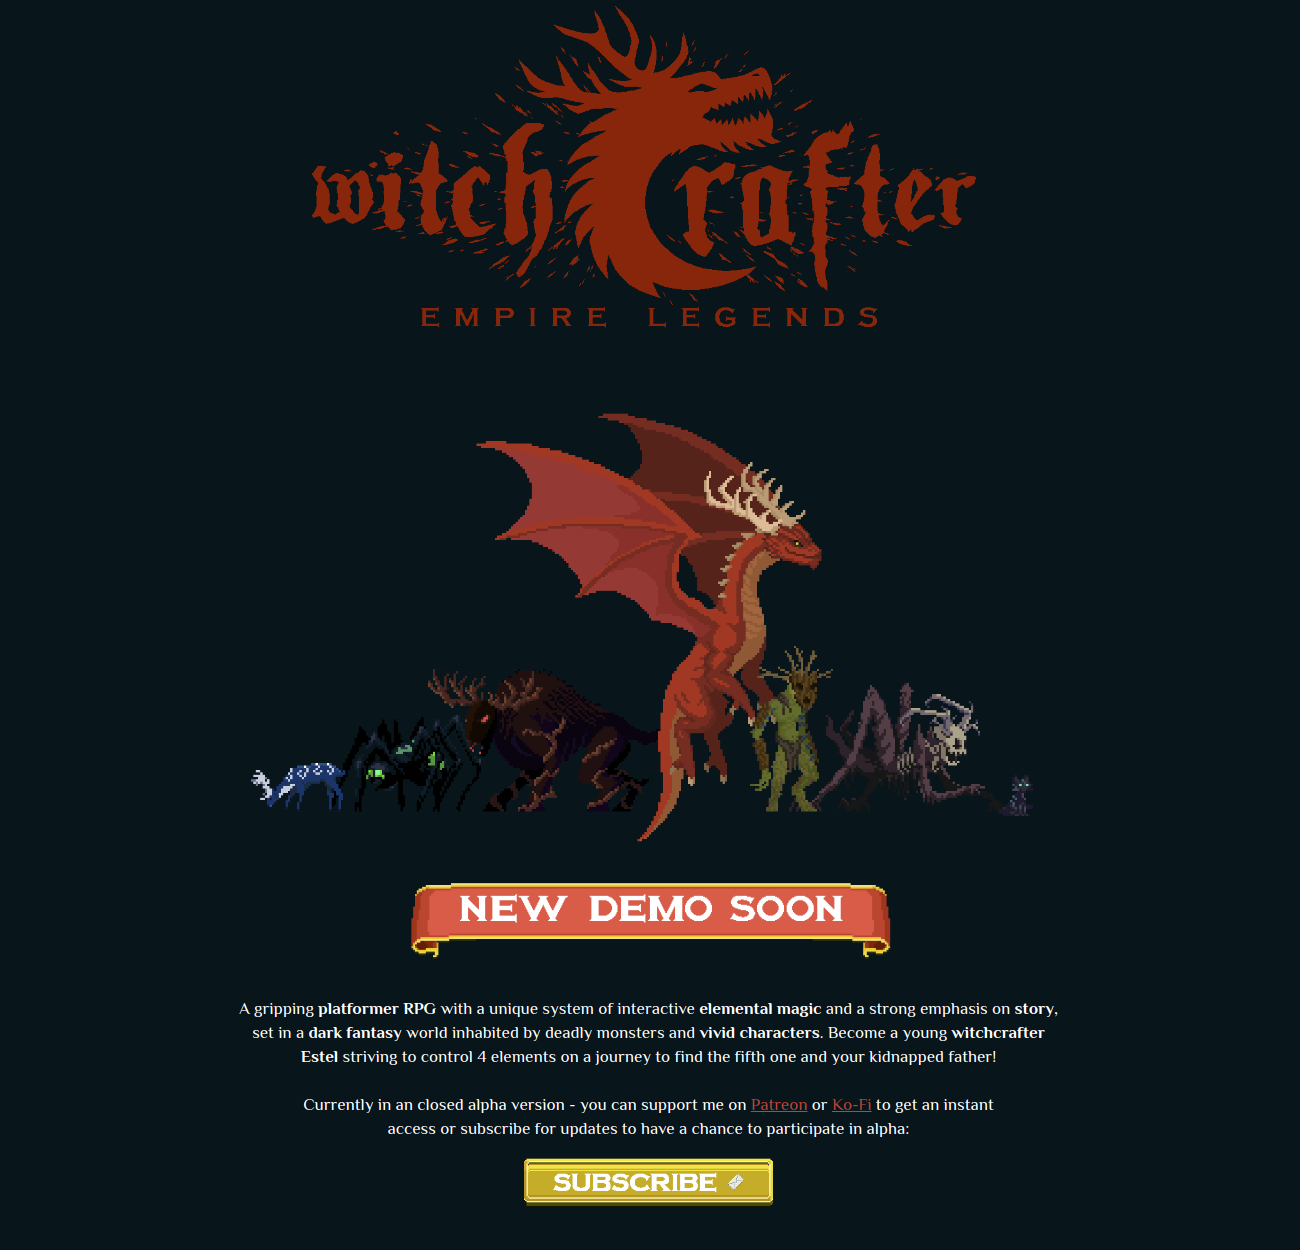 Witchcrafter: Empire Legends - design and development of an independent game and website - a gripping metroidvania platformer RPG set in a dark fantasy world full of elemental magic.